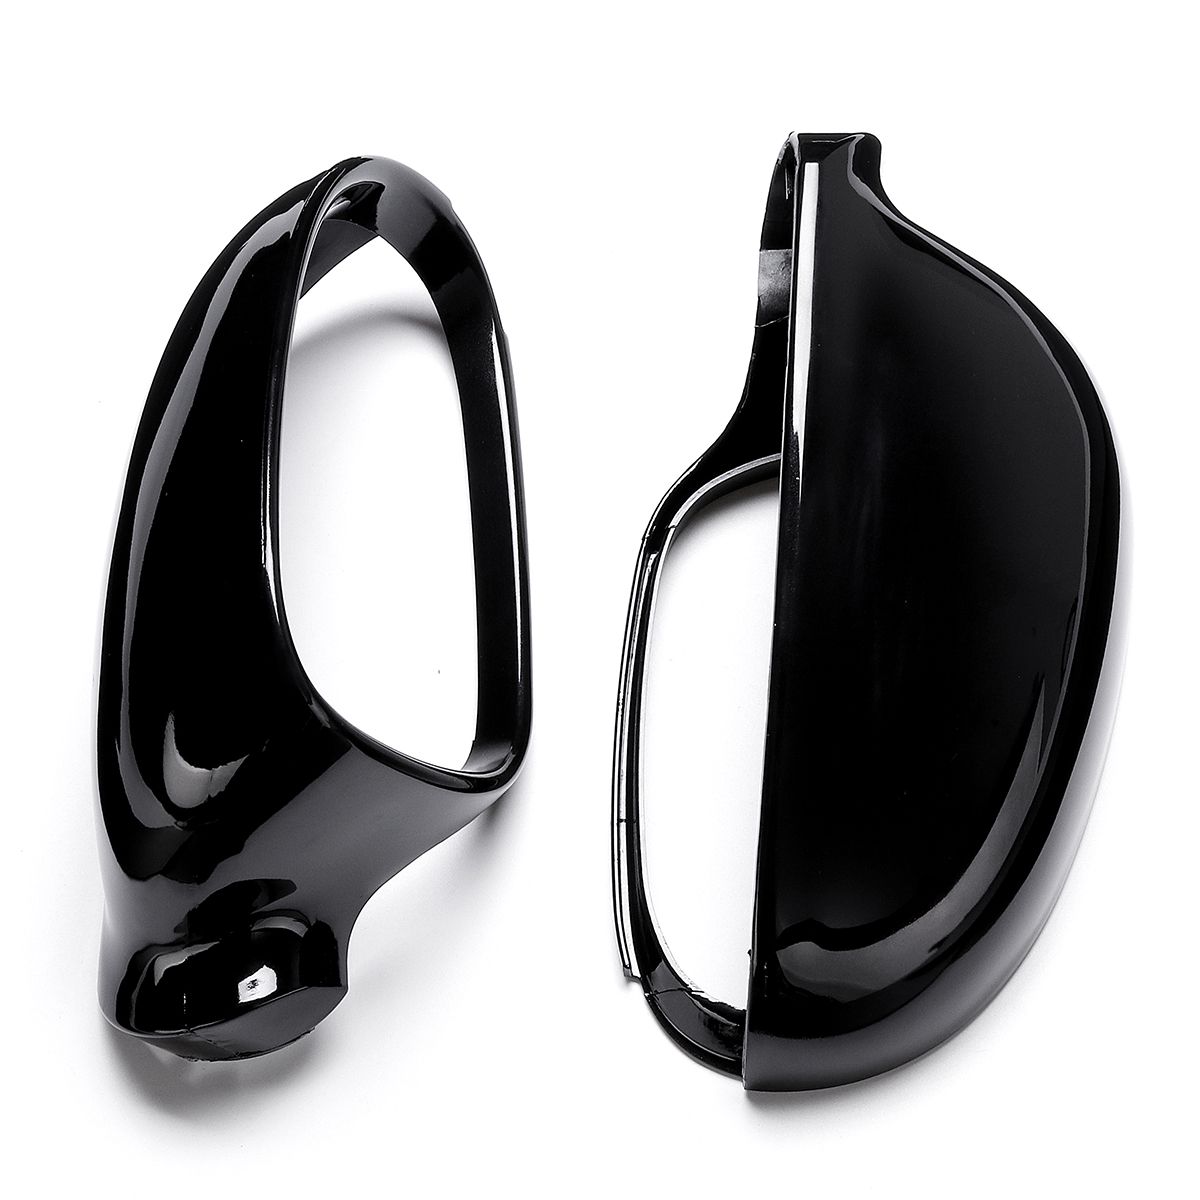 Pair-Car-Front-Wing-Side-Mirror-Cover-Housing-Black-Cap-For-VW-Jetta-Golf-MK5-Eos-for-SKODA-for-SEAT-1396027